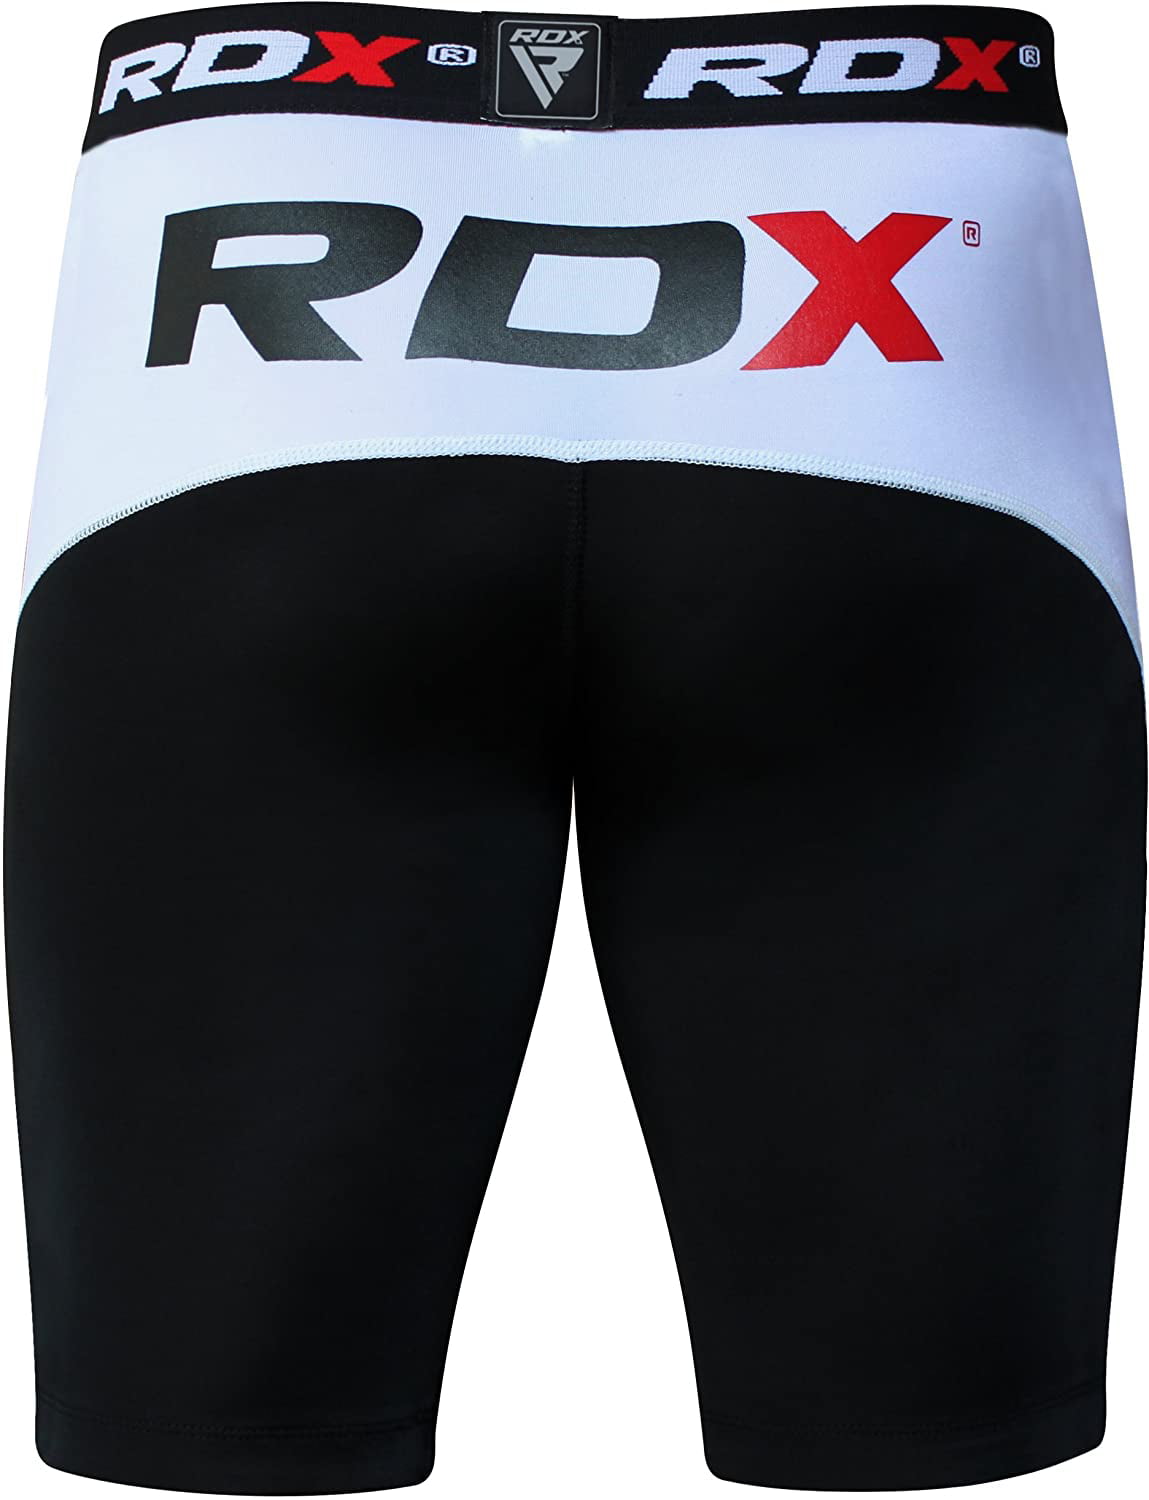 Weightlifting Running Combat Sports and Exercises RDX MMA Compression Shorts with Groin Cup for Boxing Gym Workouts Muay Thai Fighting Thermal Guard Base Layer for Fitness Training Kickboxing 